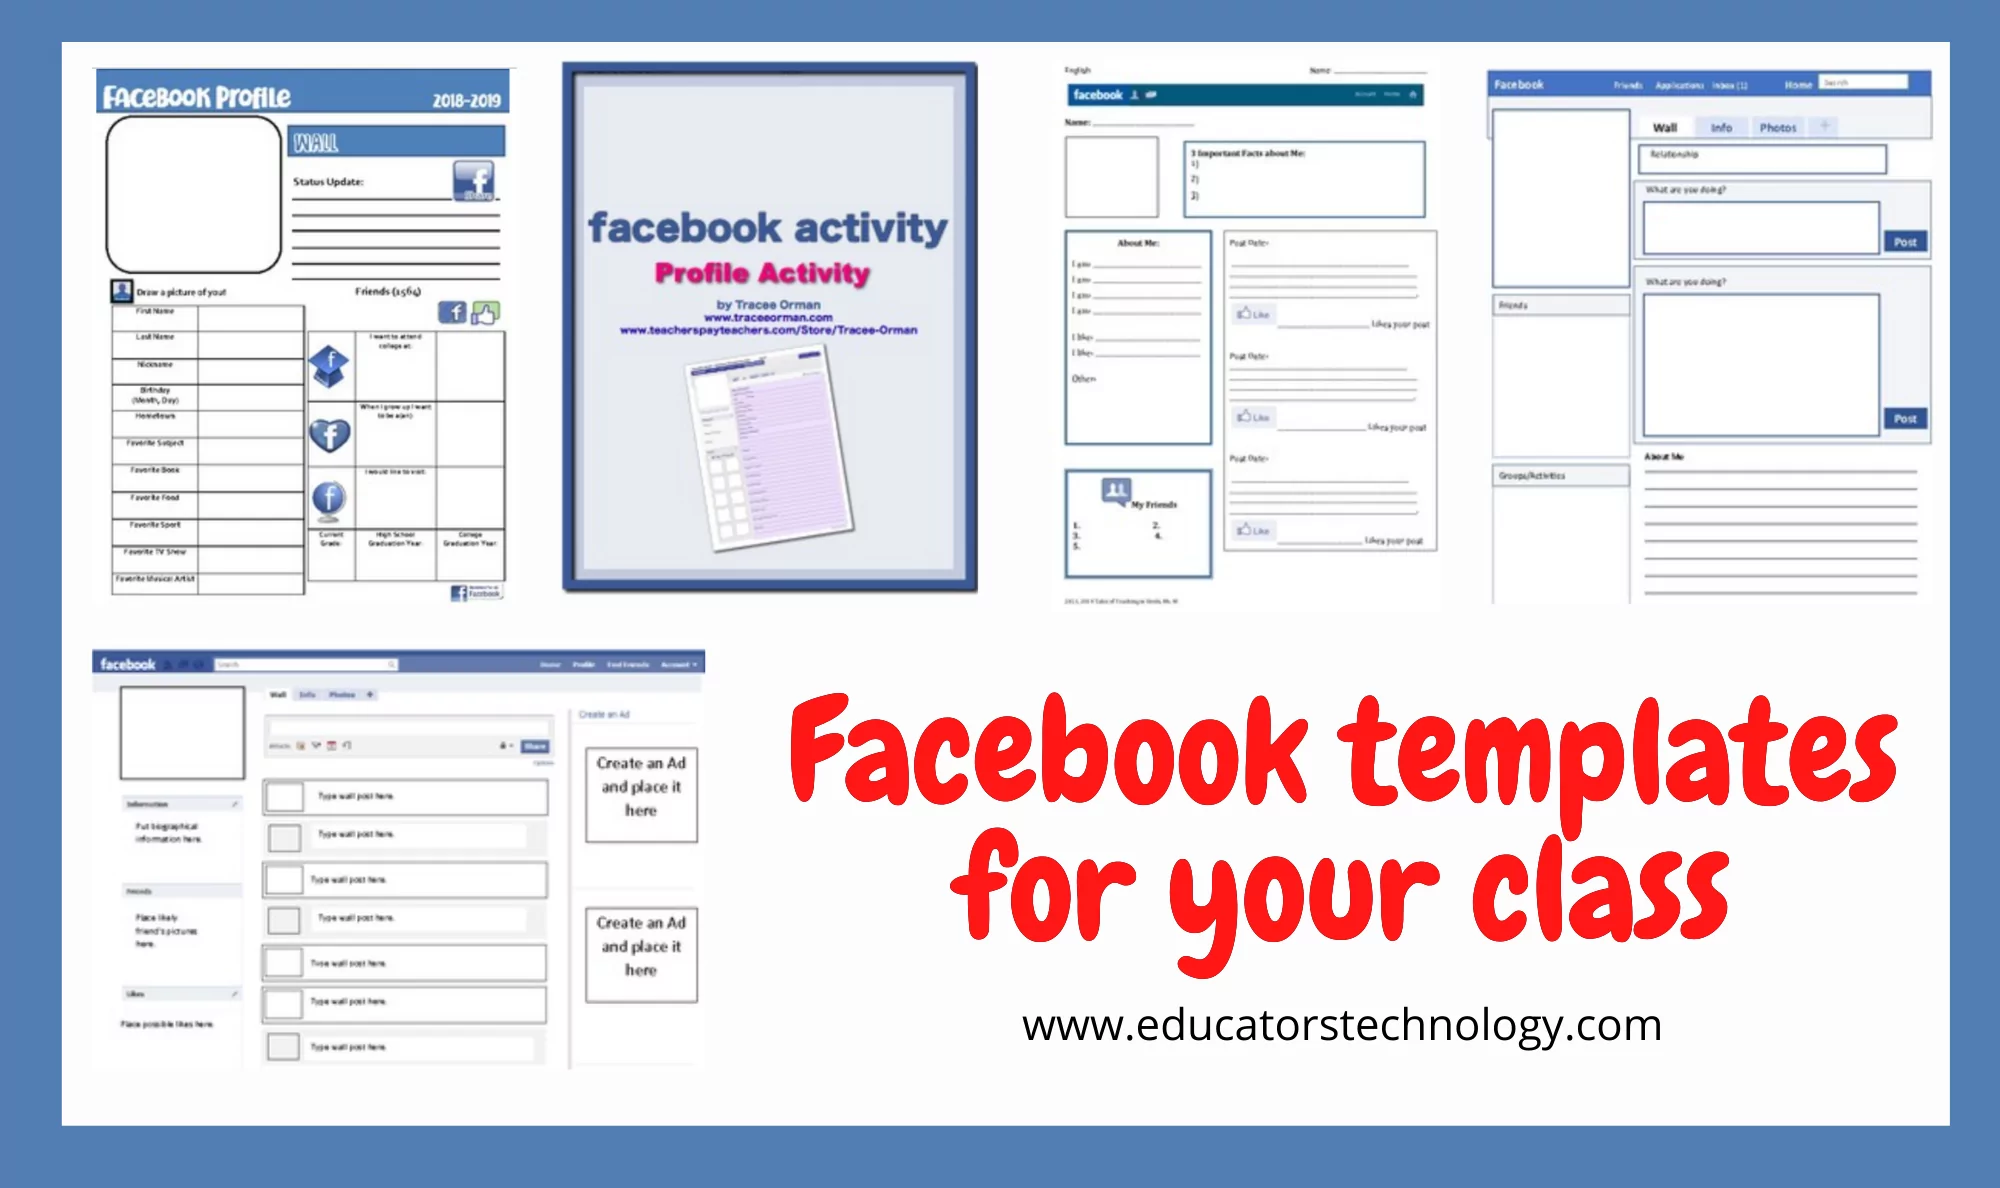 Facebook templates for your class